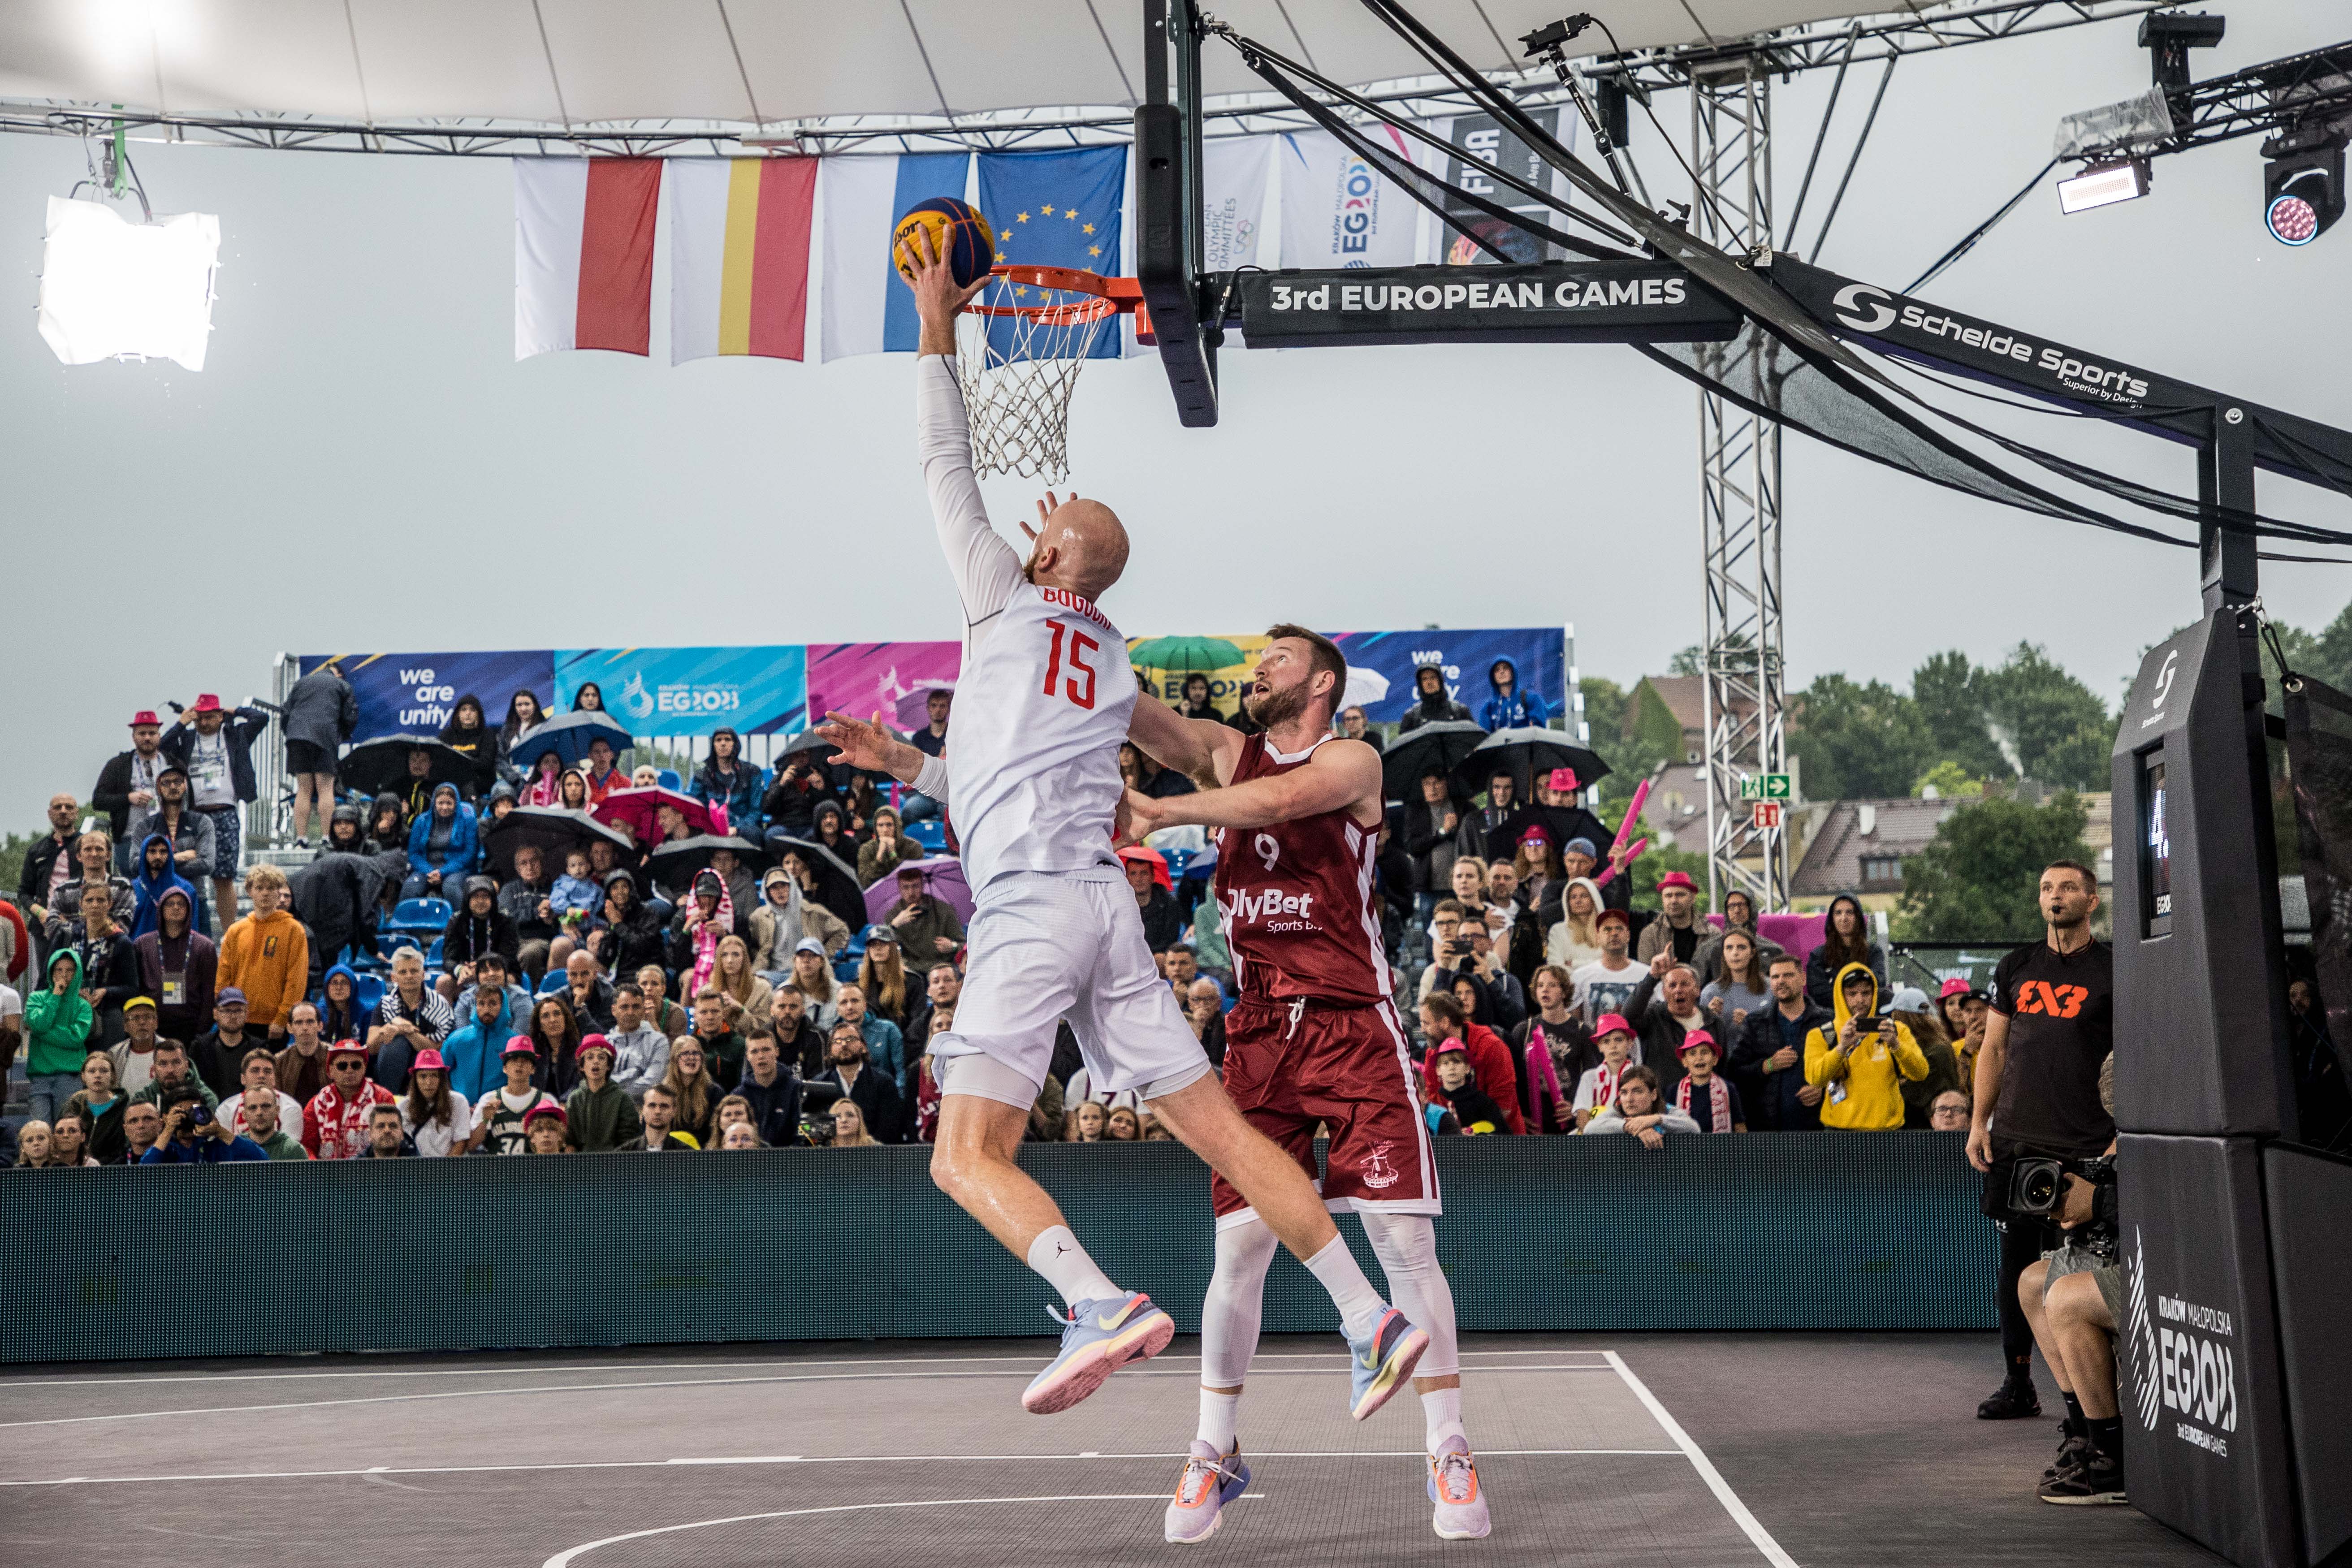 Three times yes – the success of 3×3 basketball at the European Games